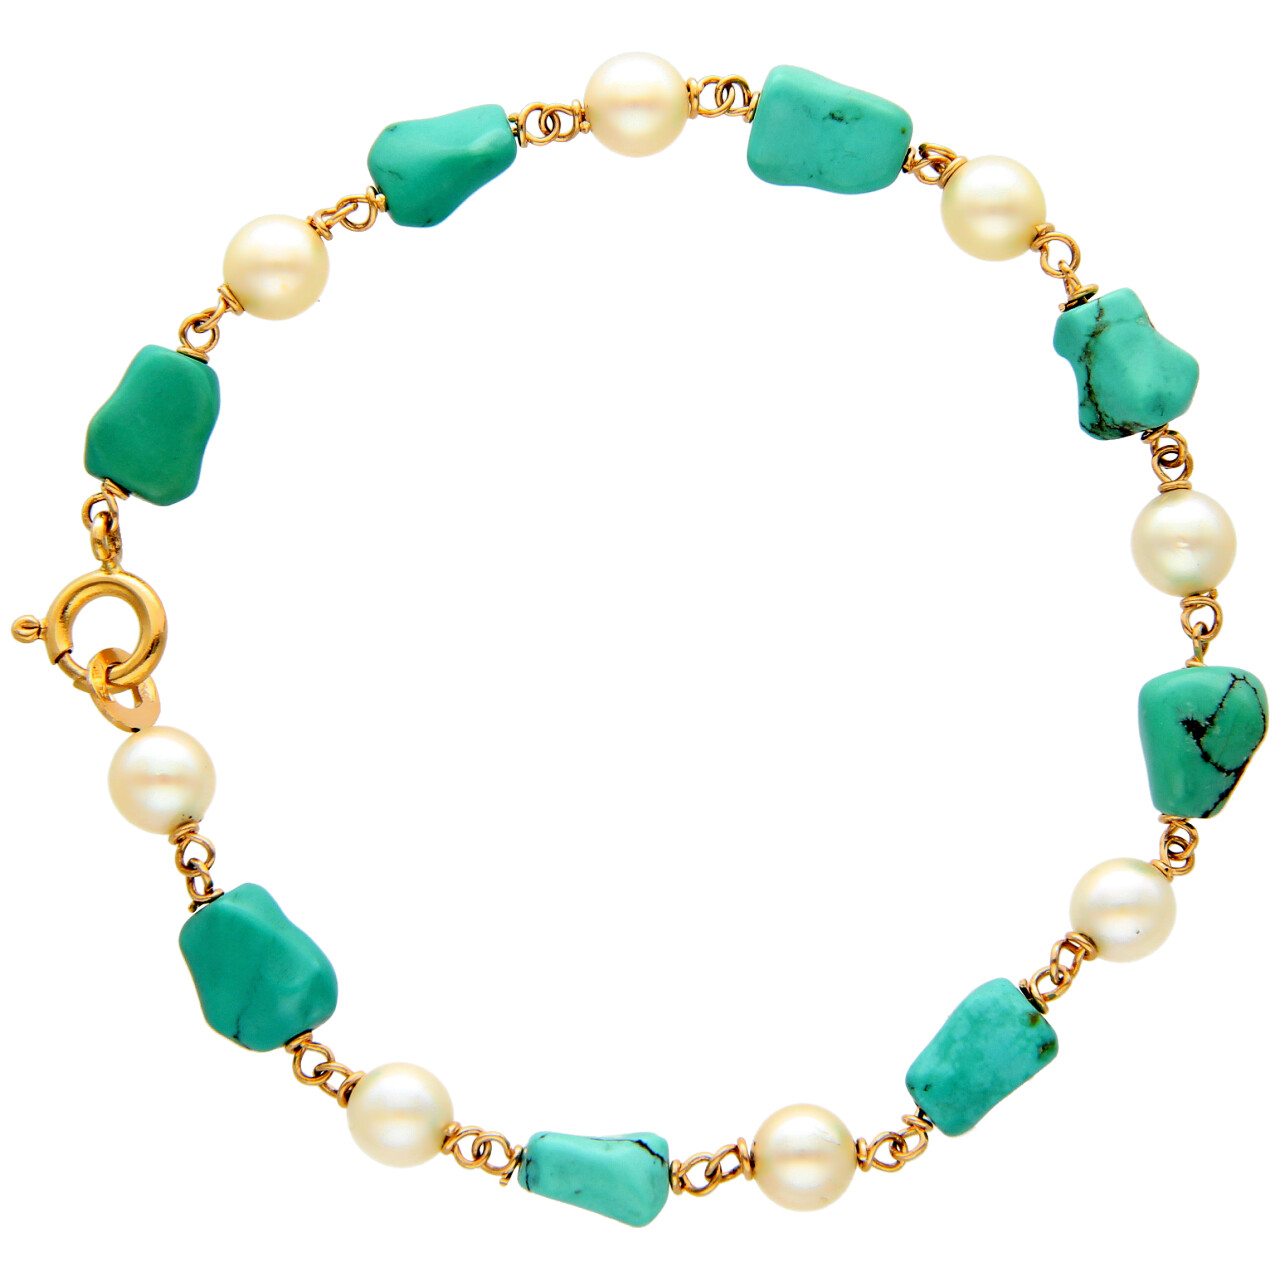 Yellow Gold Bracelet with Turquoise and Pearls